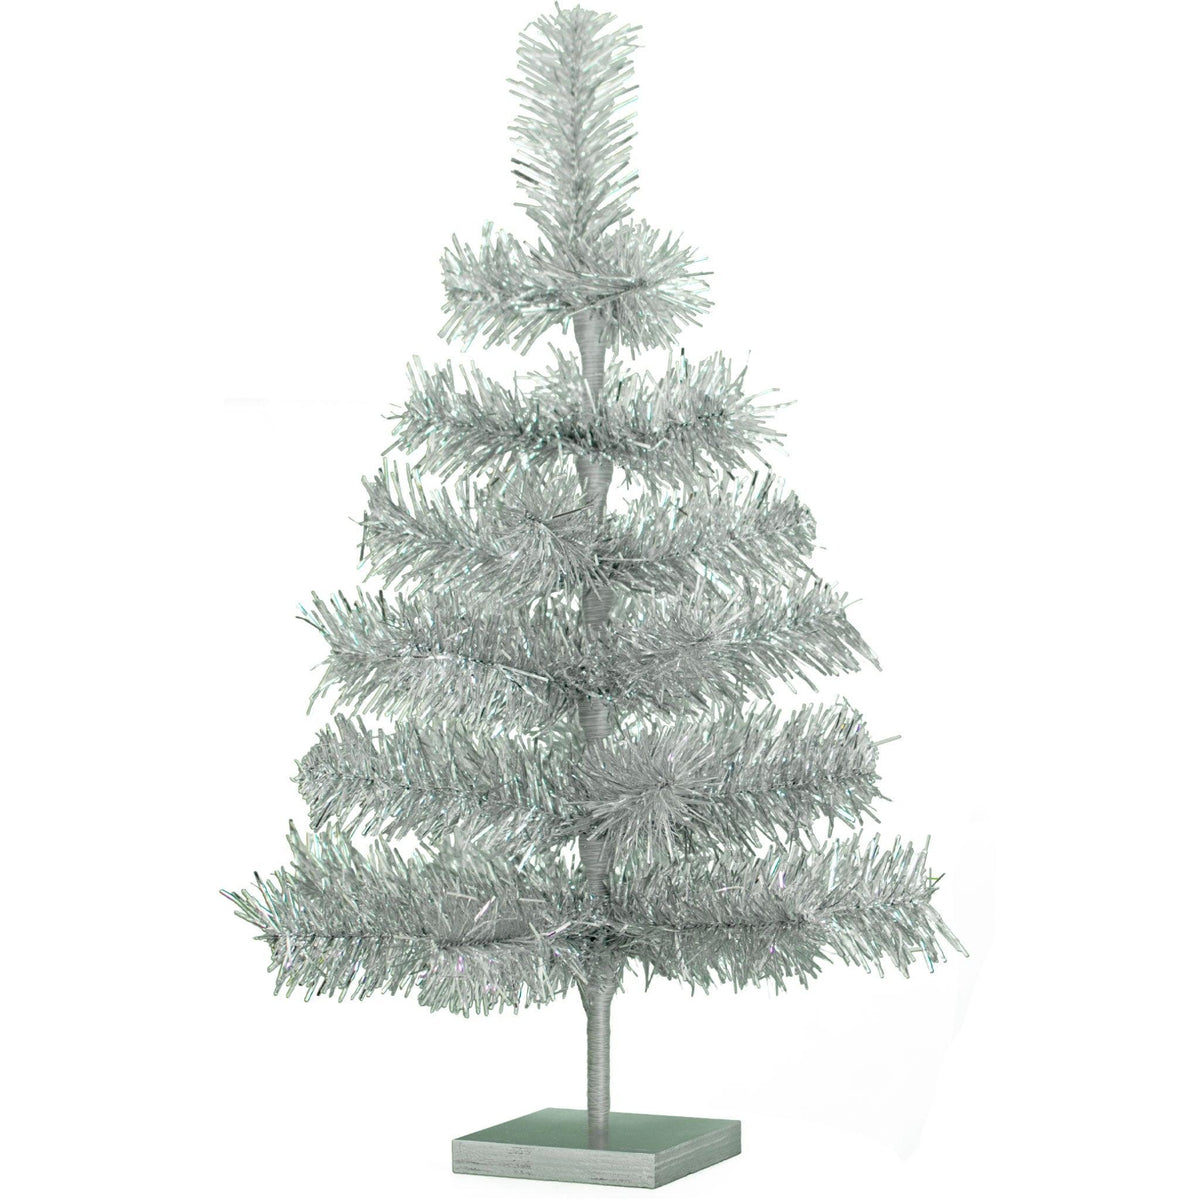 Lee Display's Original Silver Tinsel Christmas Trees! Decorate for the holidays w/ a retro-style Silver Christmas Tree. Incorporate a little silver into your holiday decorations this year. 4 Sizes to Choose: 18in - 48in Heights Available. 18in Trees are perfect table-top display heights and 48in Trees make beautiful centerpieces.